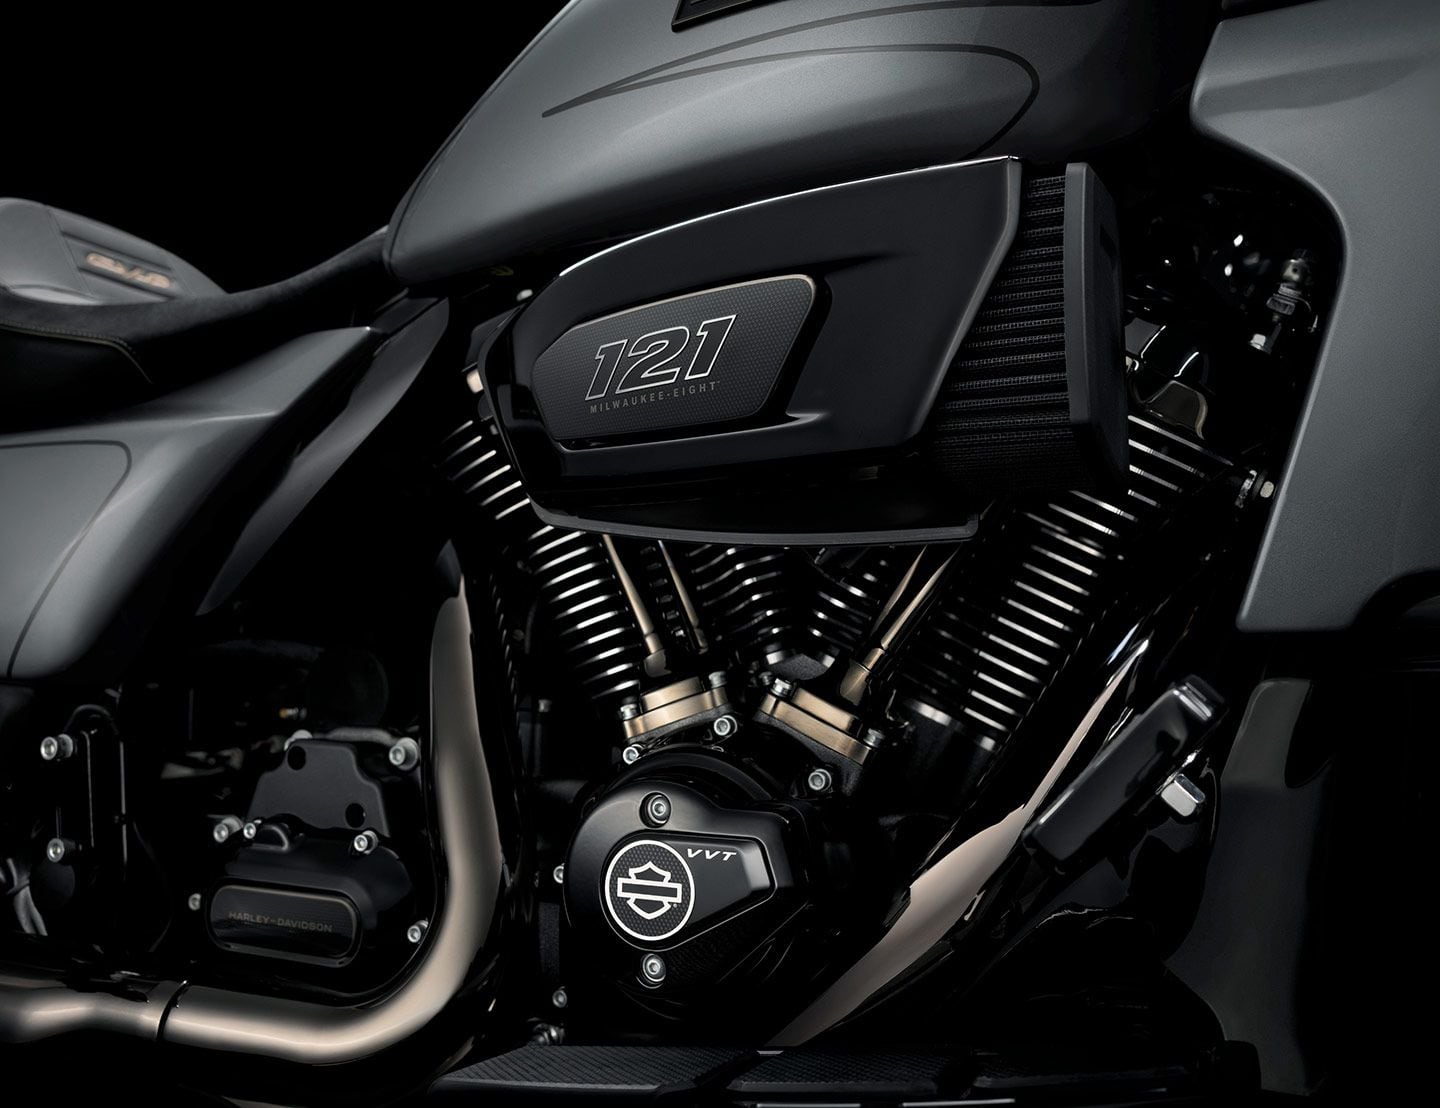 The new Milwaukee-Eight VVT 121 engine features liquid-cooling, displaces 1,977cc, and is said to produce 115 peak horsepower at 4,500 rpm.